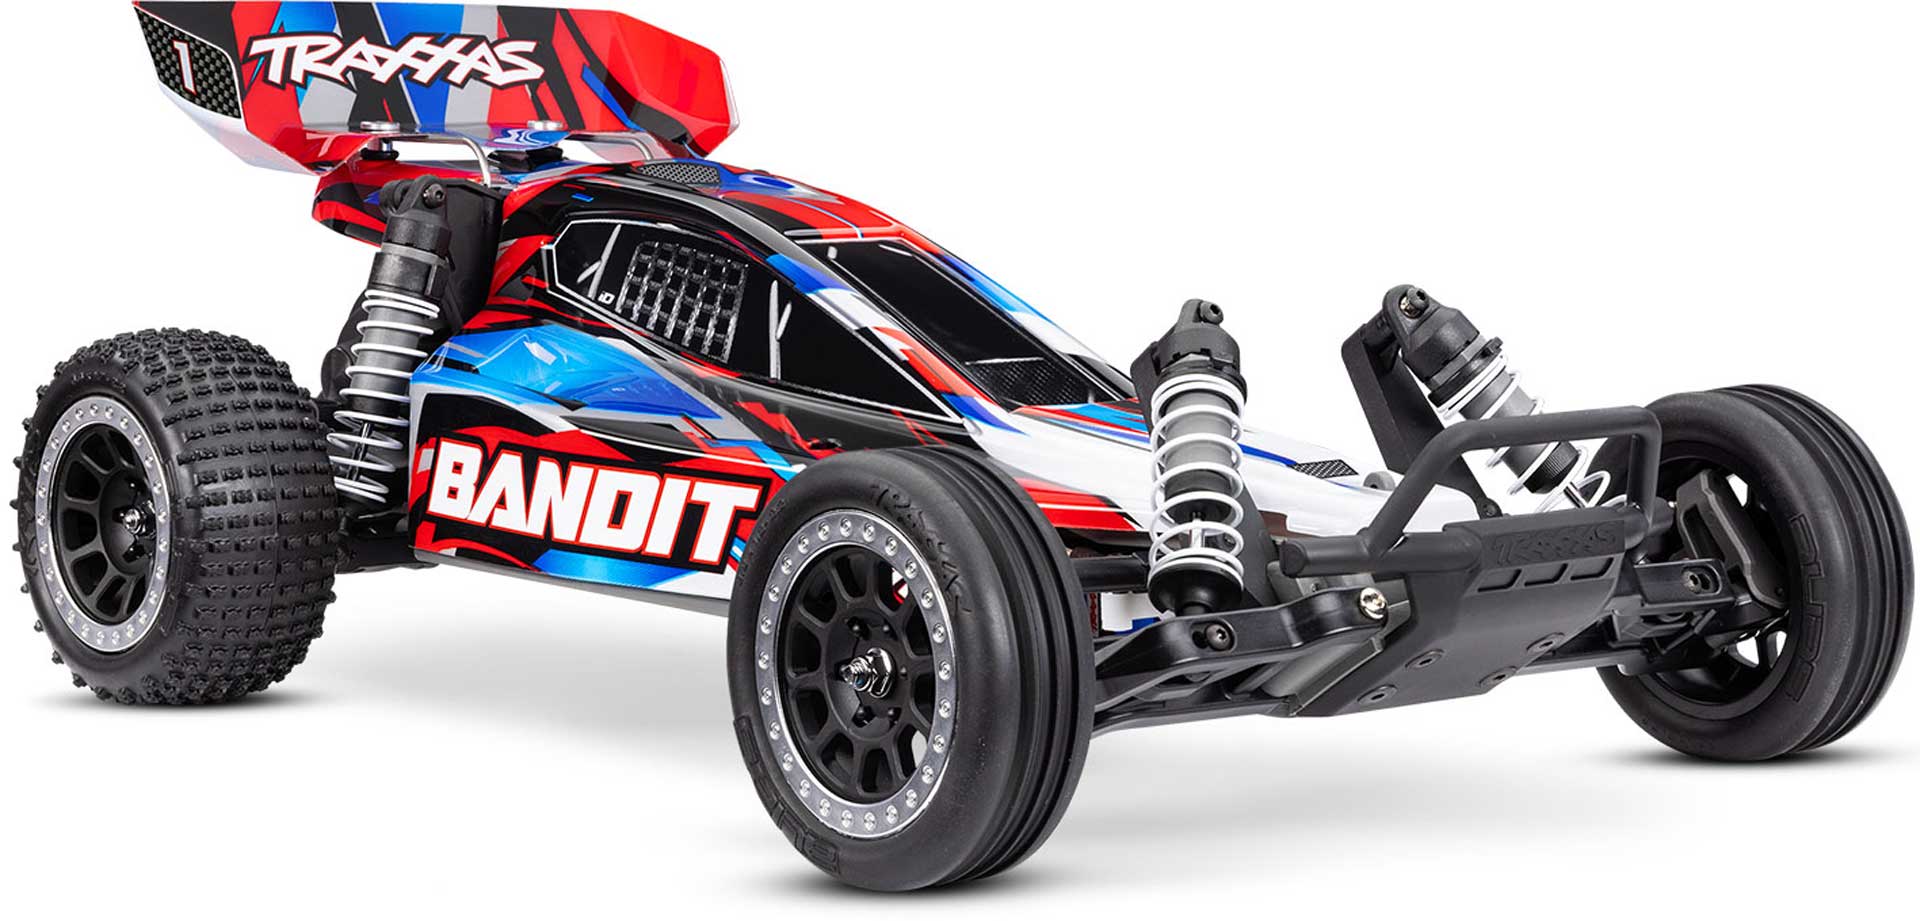 TRAXXAS BANDIT ROT 1/10 2WD BUGGY RTR BRUSHED, HD, MIT AKKU UND 4 AMPERE USB-C-LADER